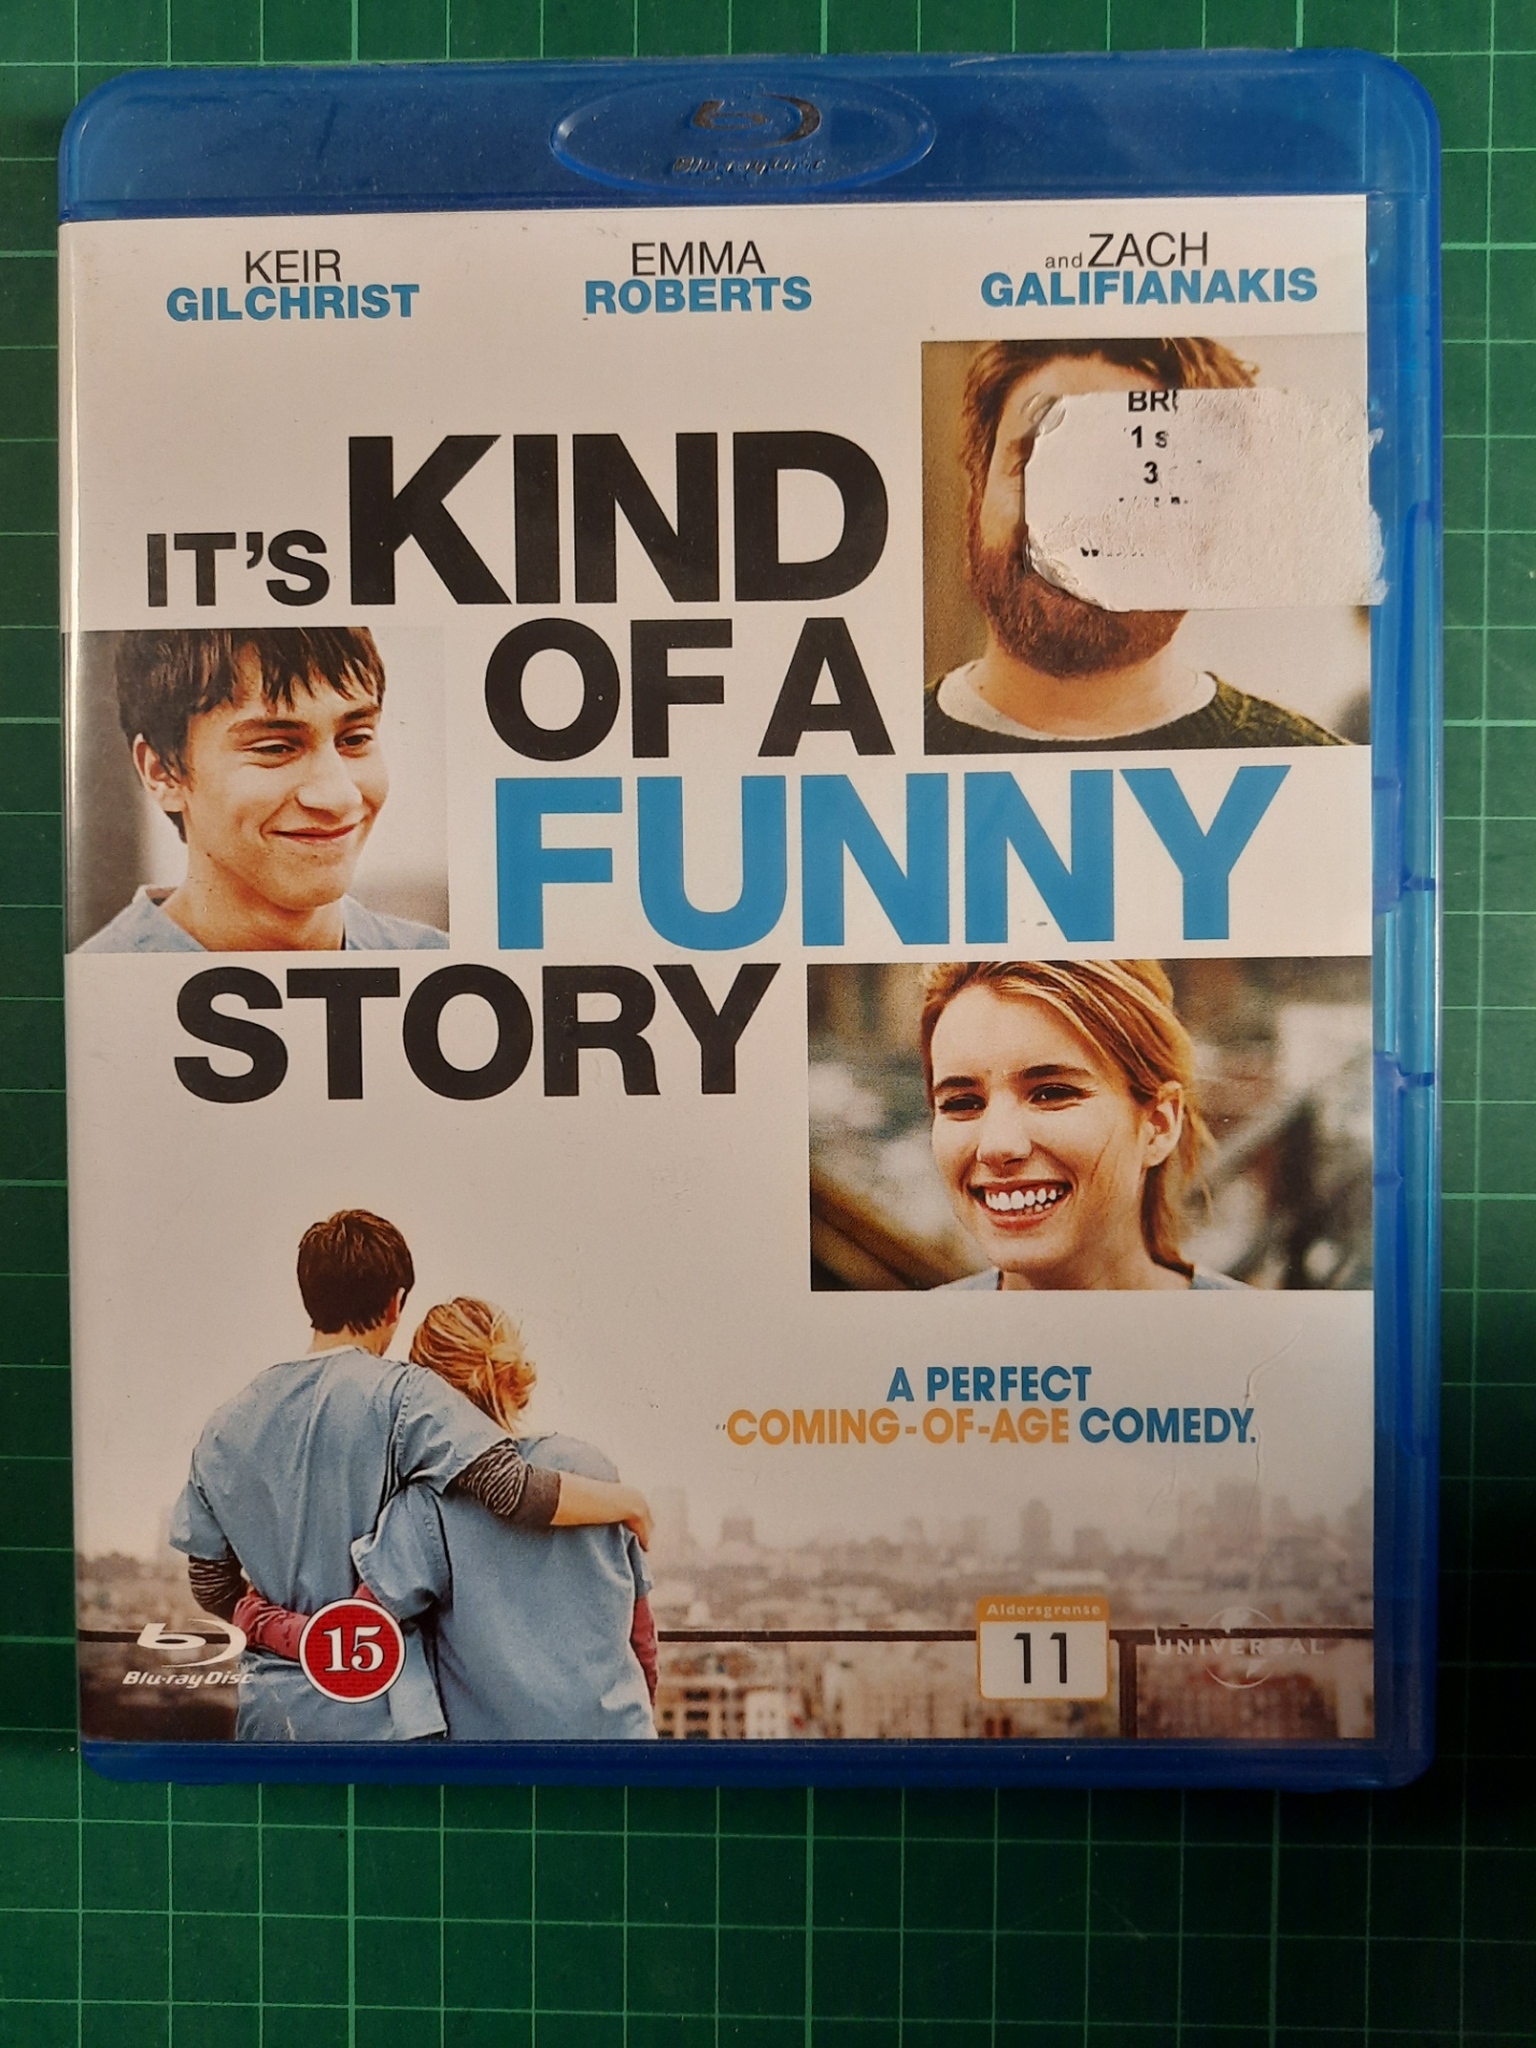 Blu-ray : It's kind of a funny story